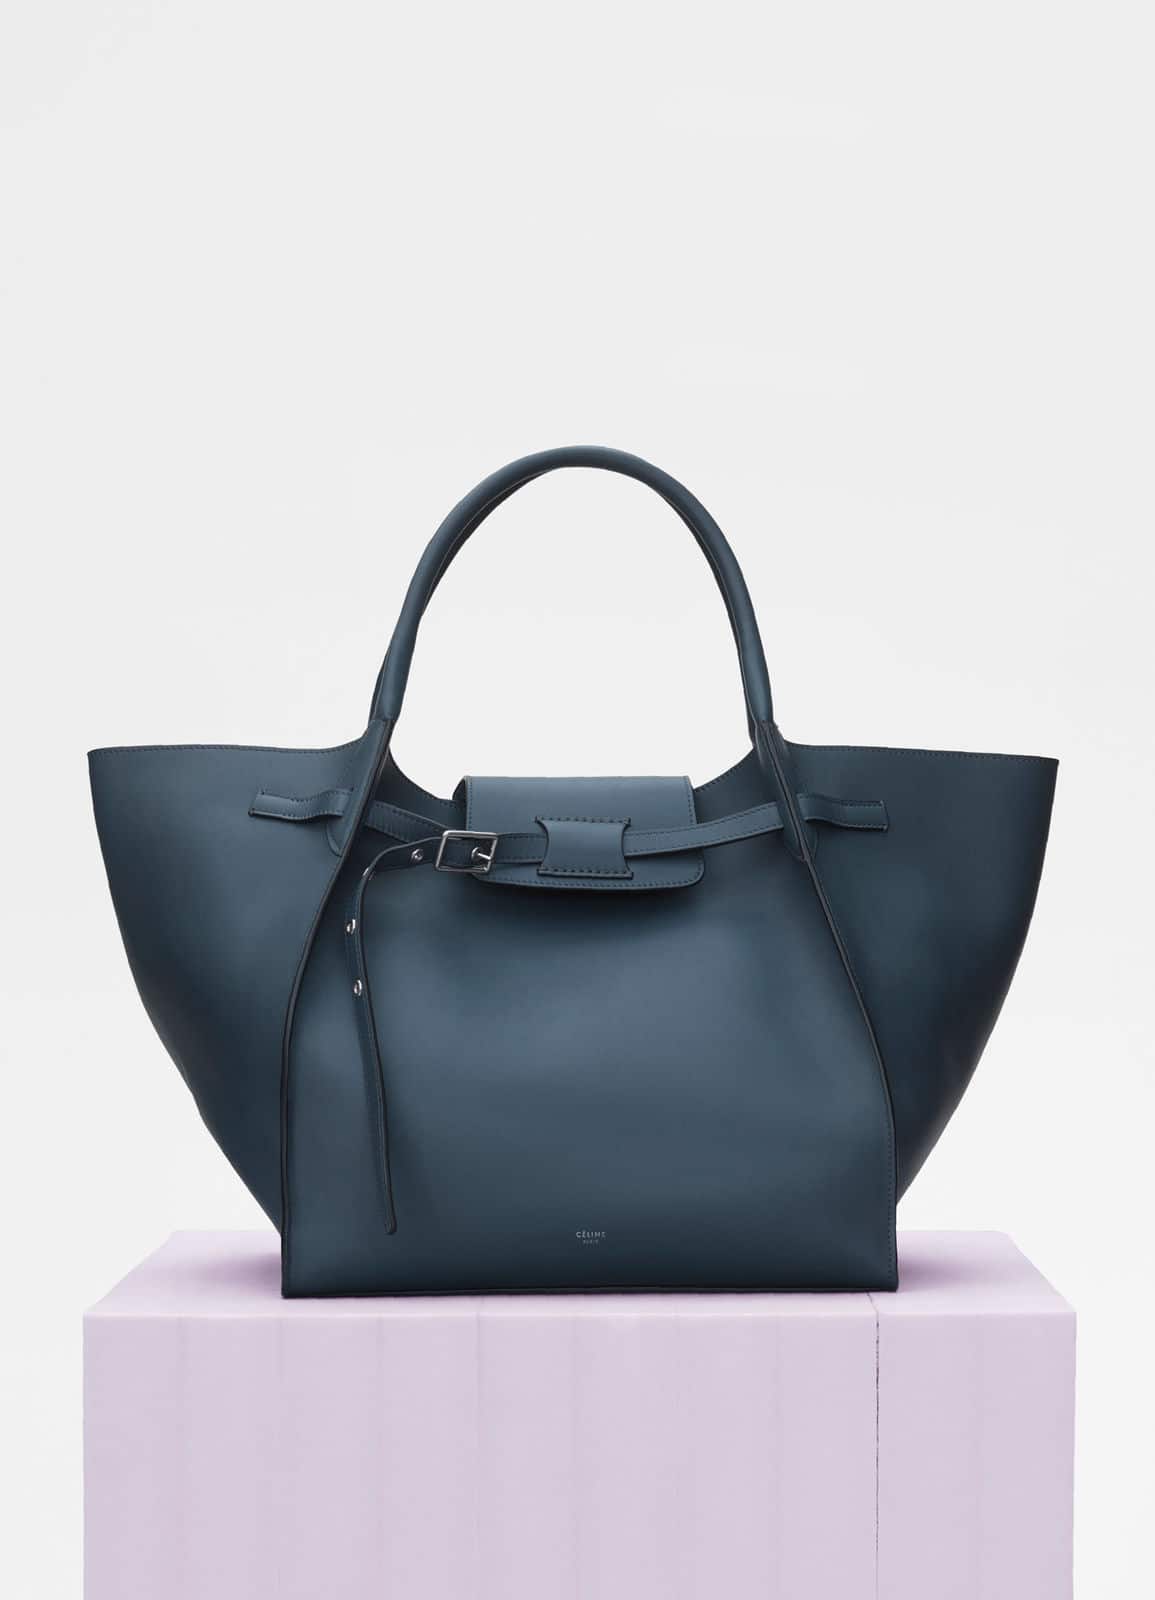 how much is a celine bag